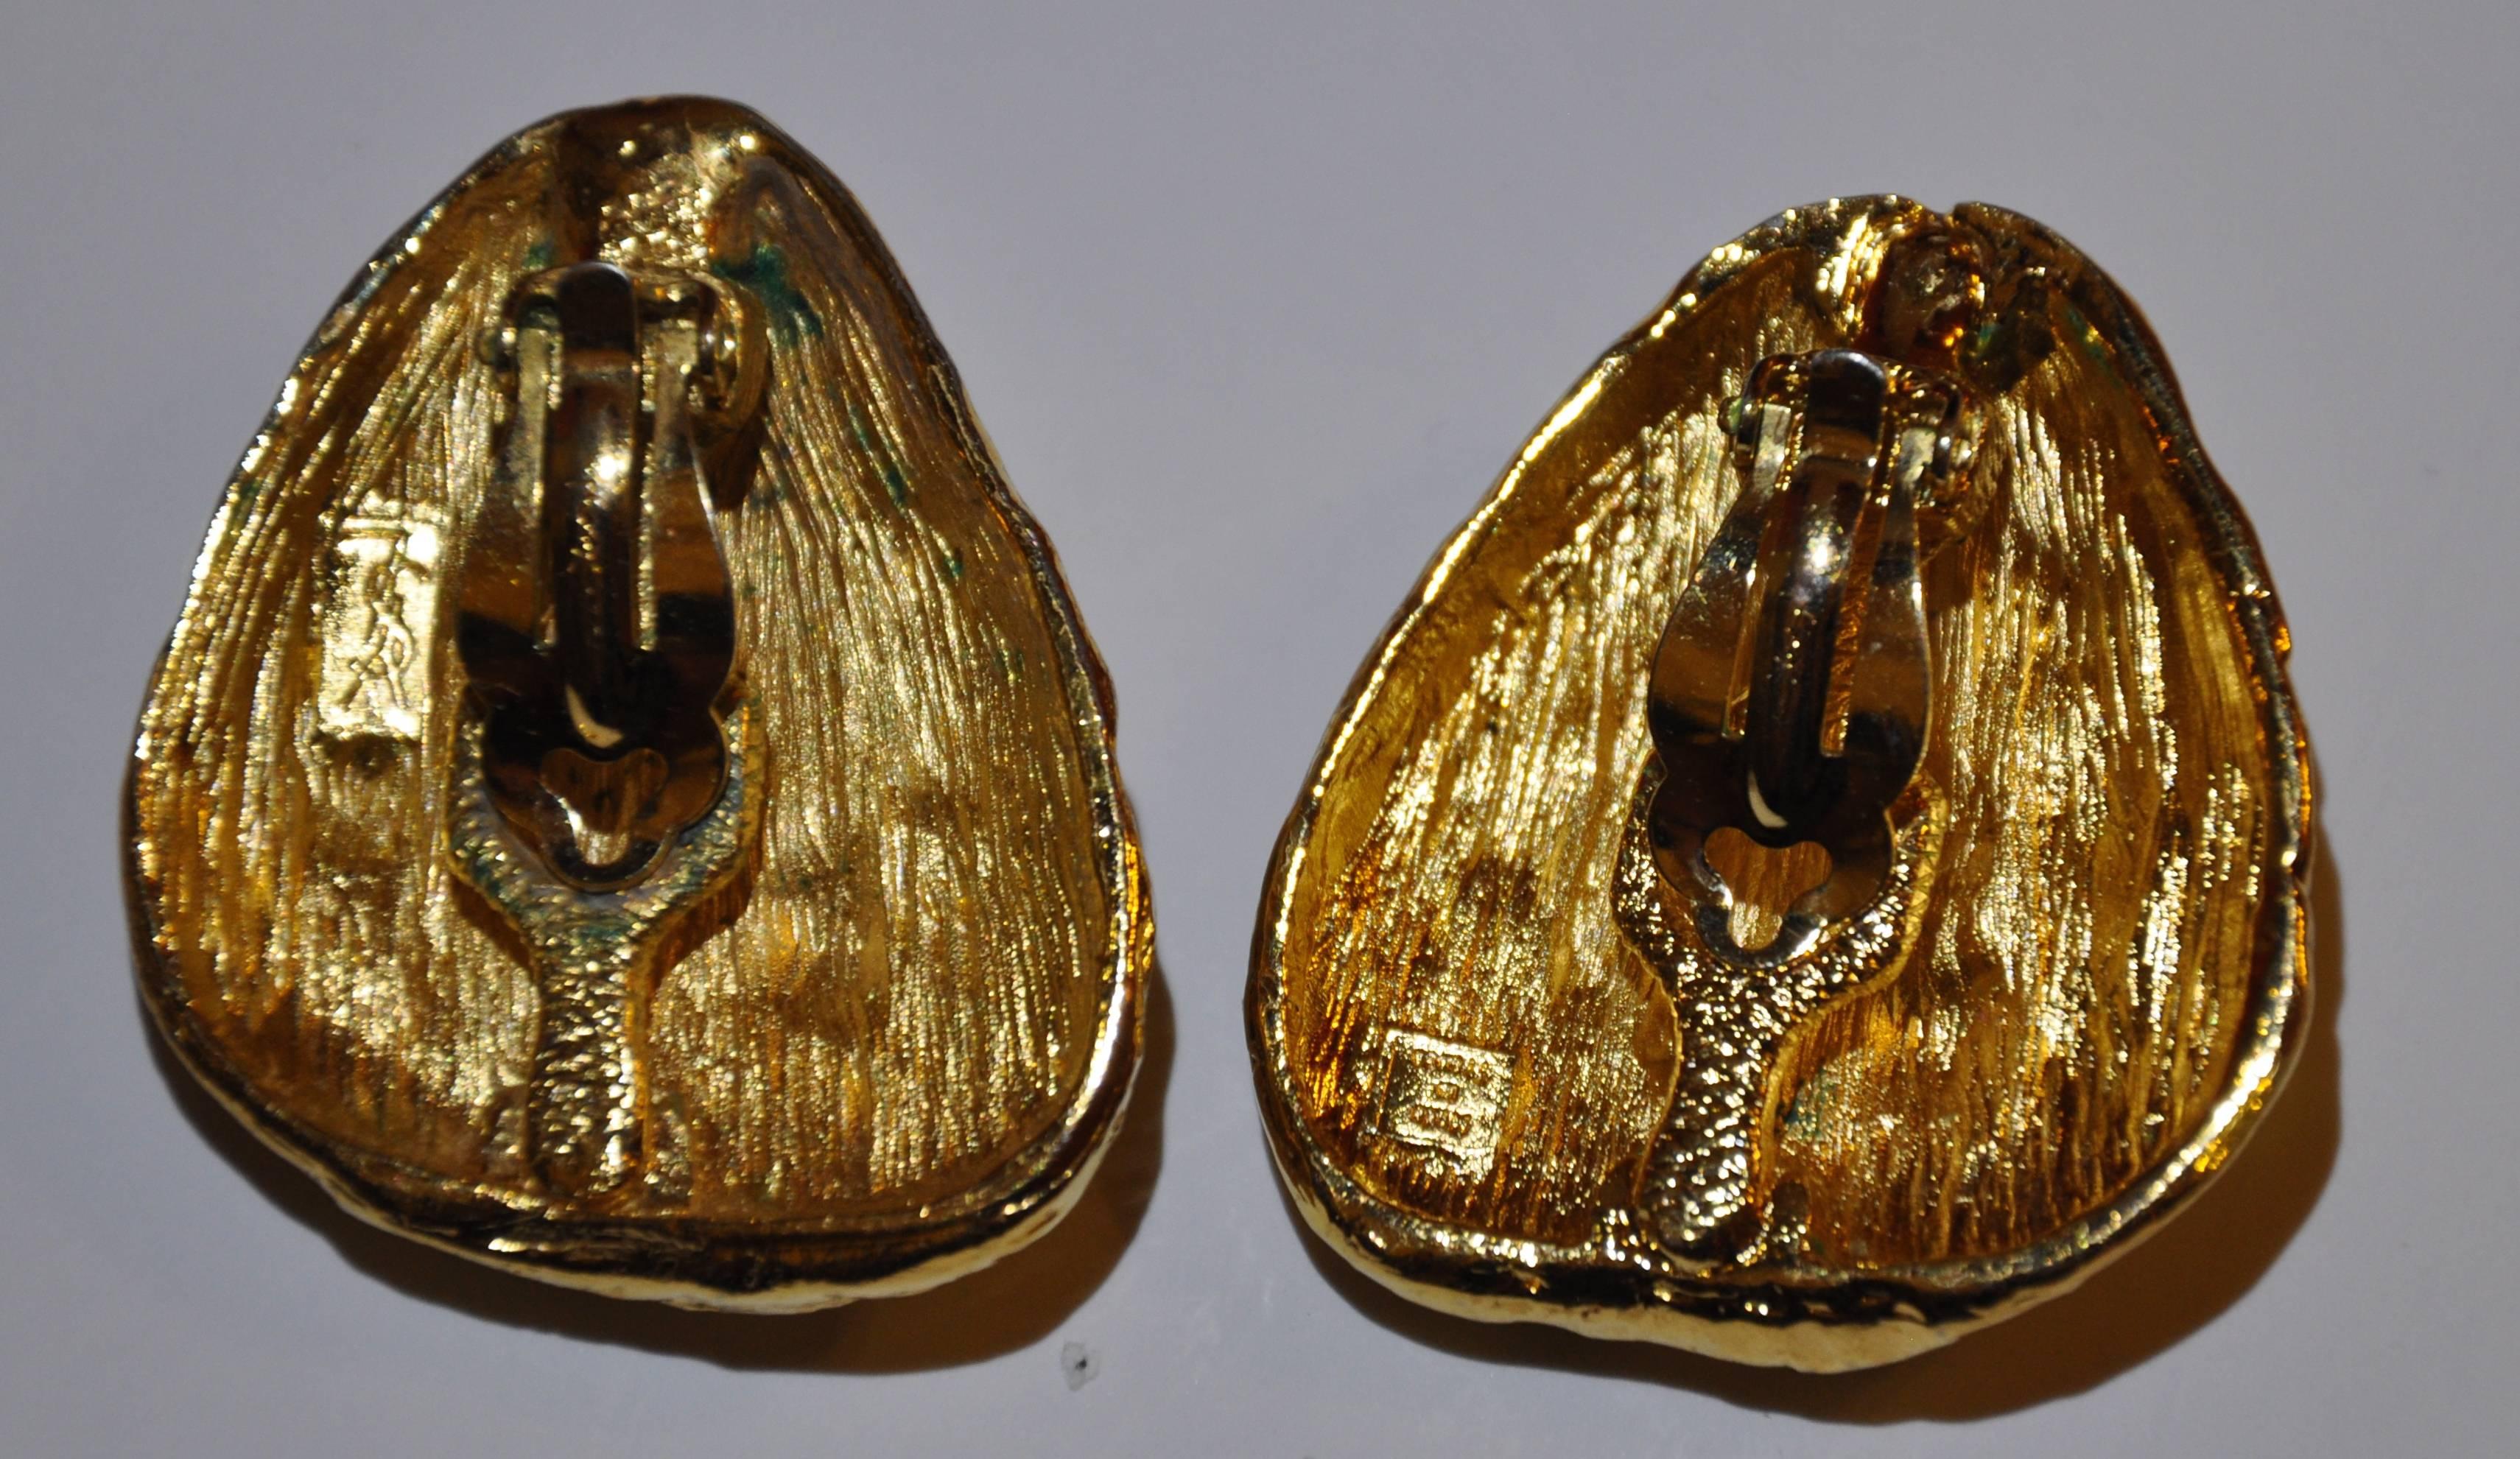        Yves Saint Laurent wonderfully multi "Nugget" huge gilded gold tone with a vermeil finished clip on earrings has the signature YSL engraved on the back. These earrings measures 1 3/4" in height and  1 1/2" in width. The